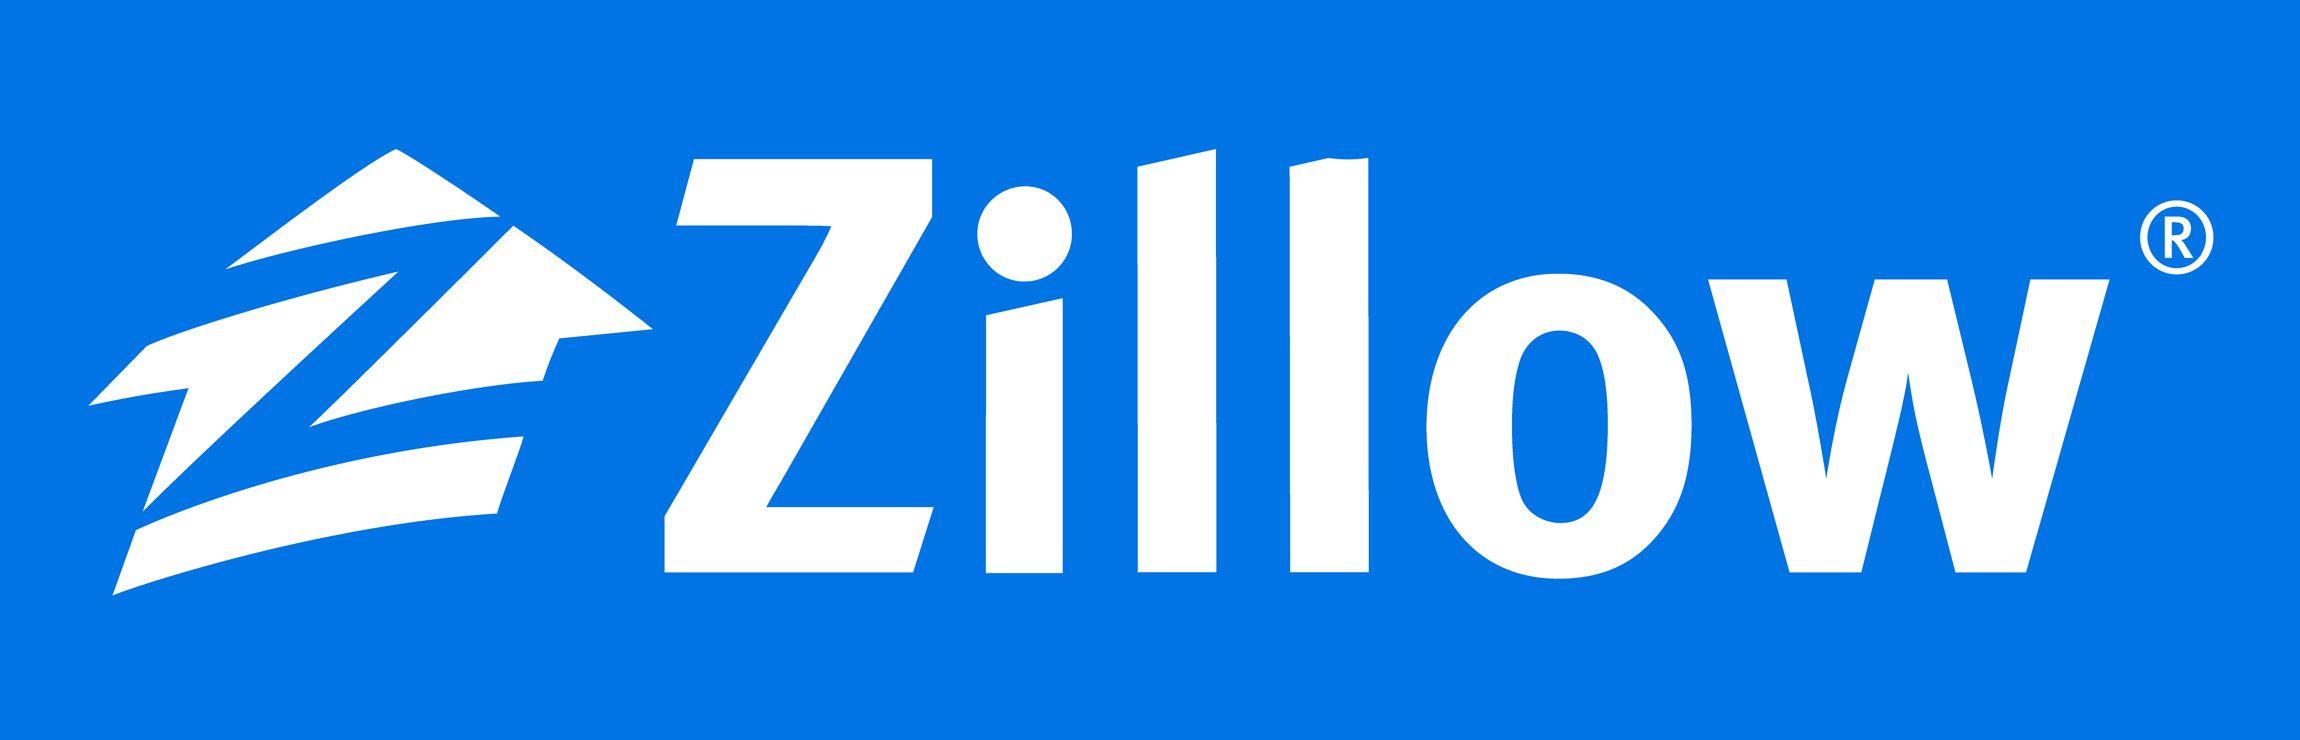 Zillow Group Logo - Zillow Expands Quickly Into Canada